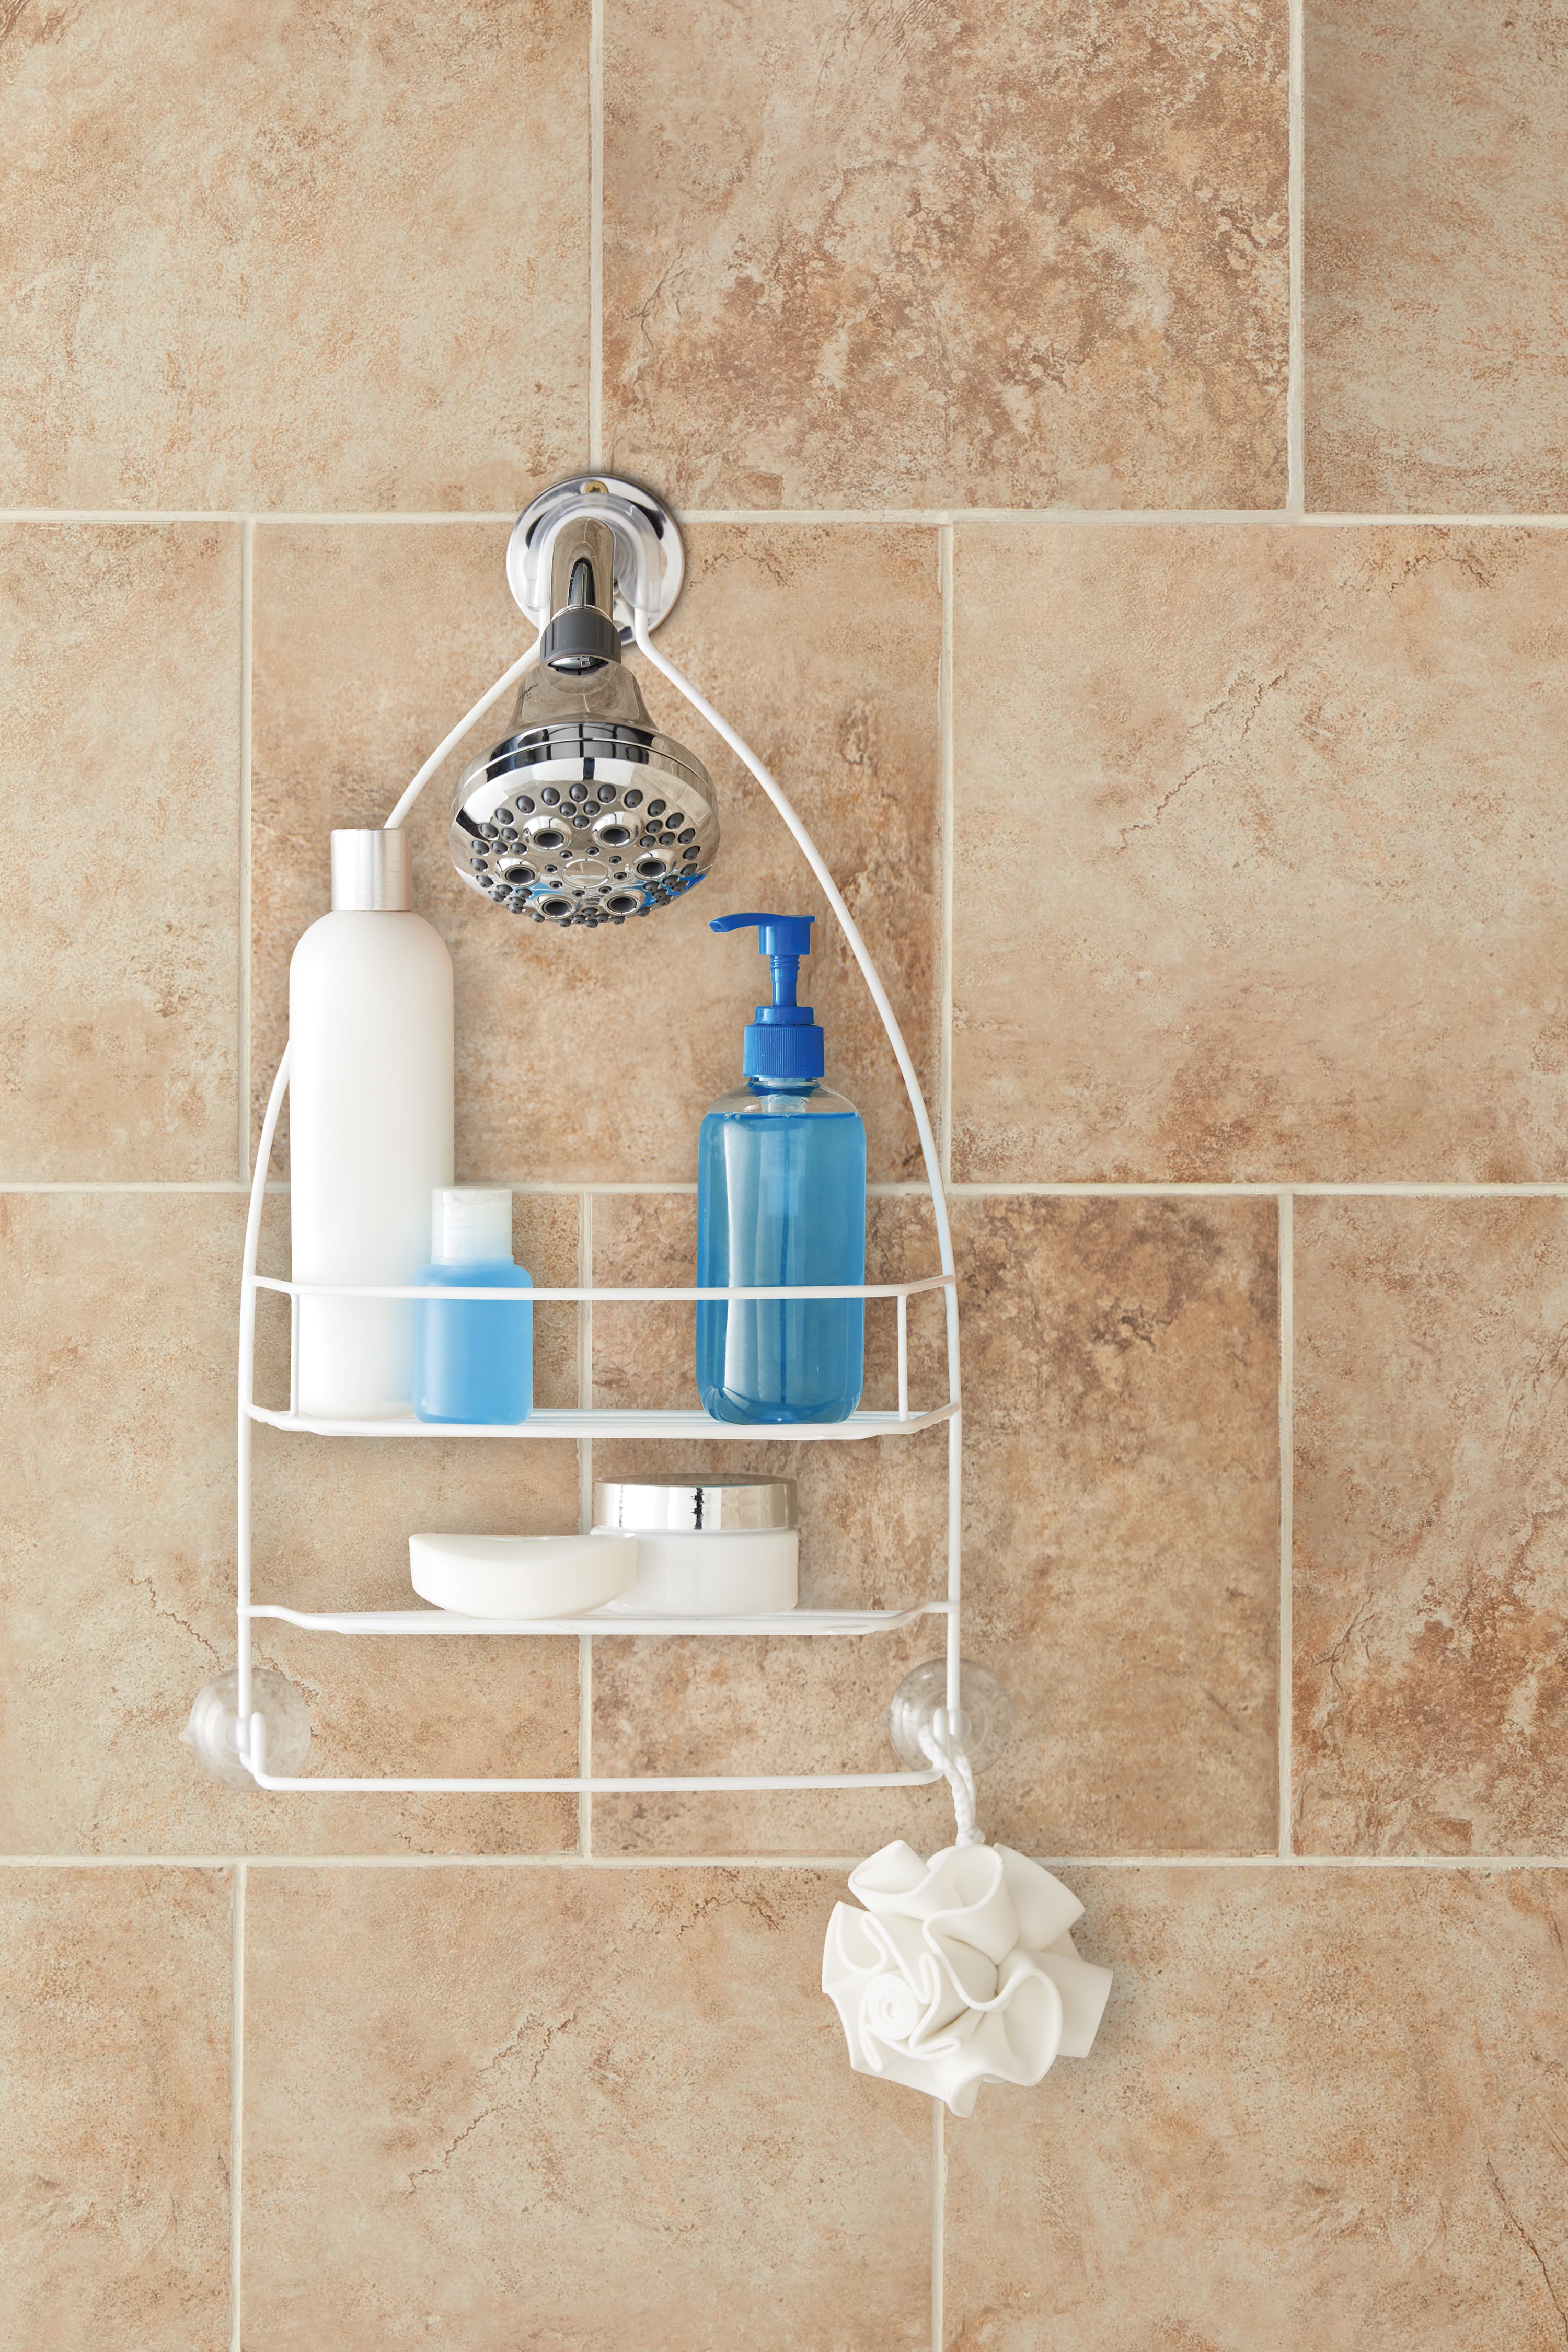 White Shower Caddy with 1 Shelf, Mainstays over the Showerhead - image 2 of 8